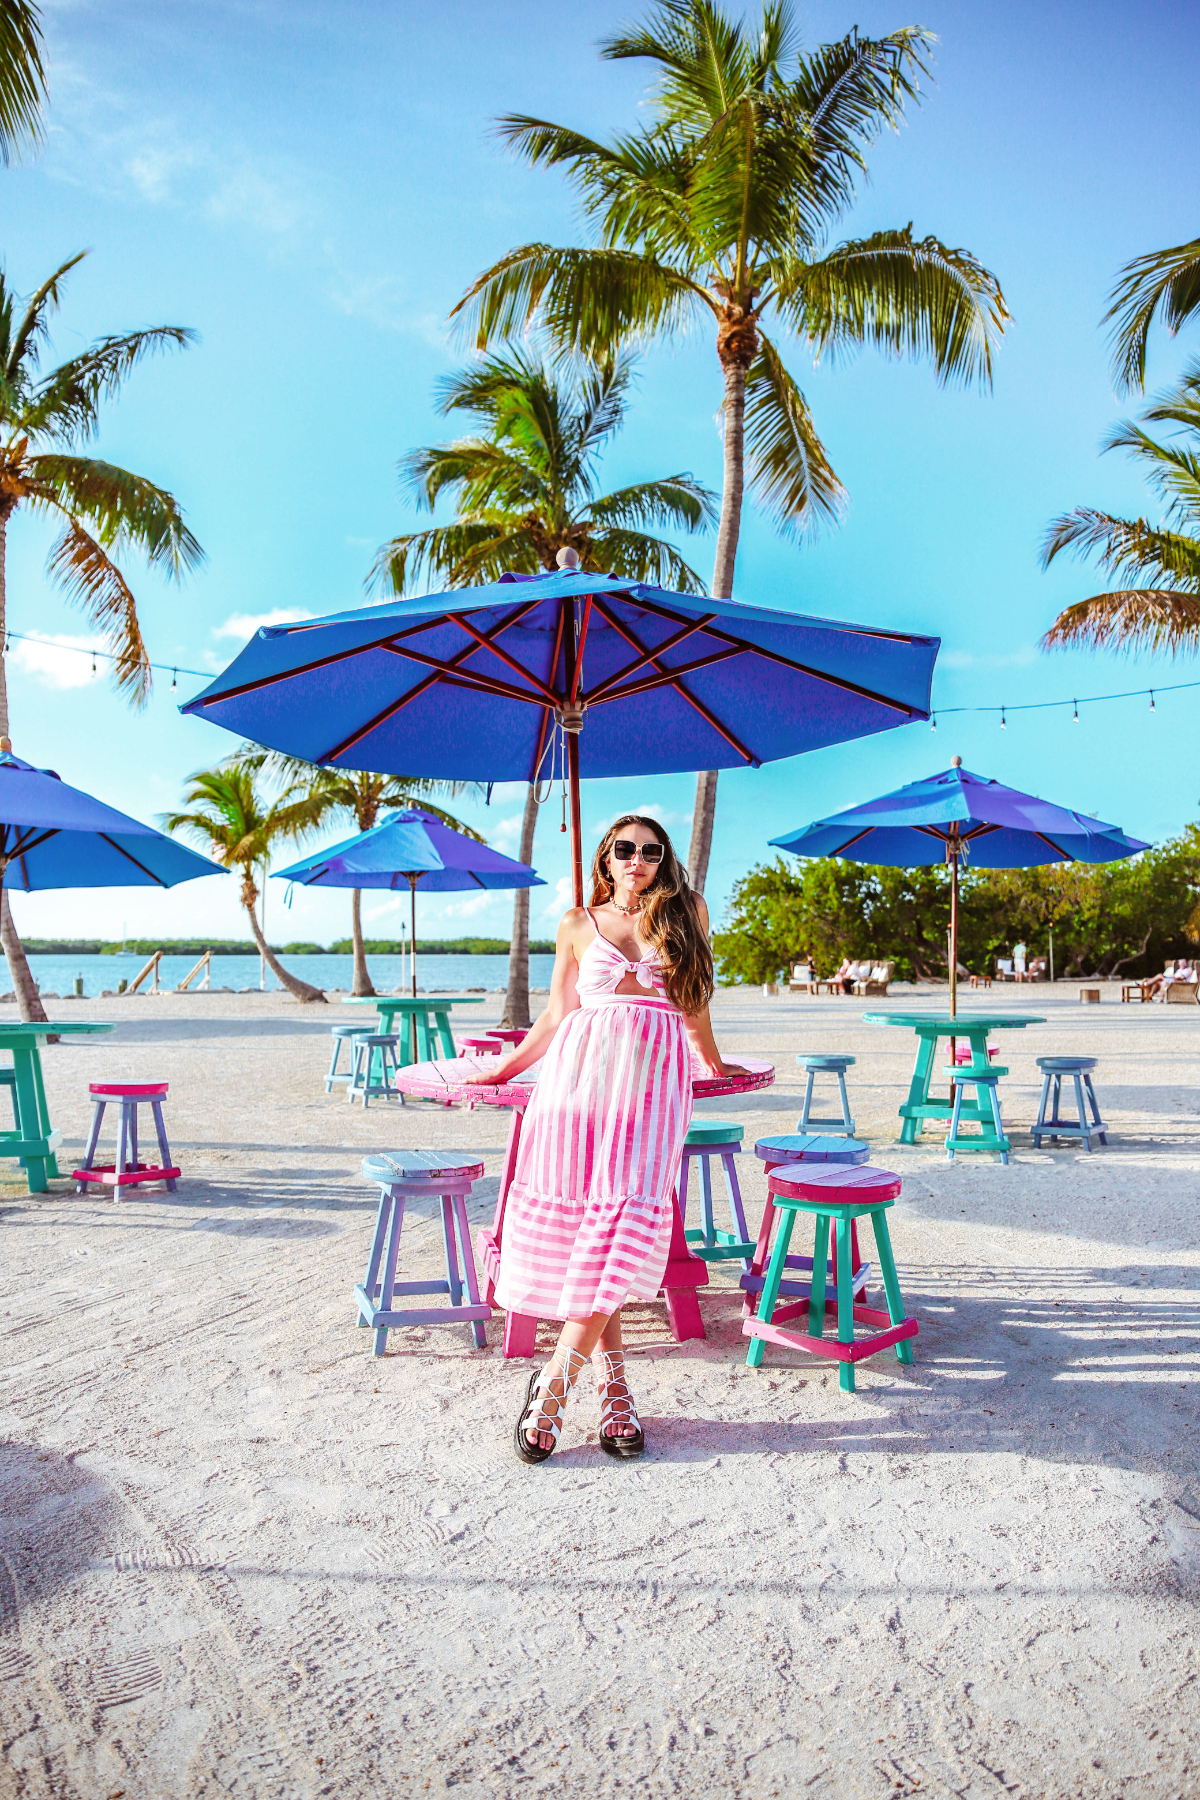 Travel blogger Lauryn Hock leans against a picnic table at Morada Bay Beach Cafe. She's wearing astriped pink maxi dress, sunglasses, and lace up sandals. Behind her are palm trees and other colorful beach tables, chairs, and umbrellas.